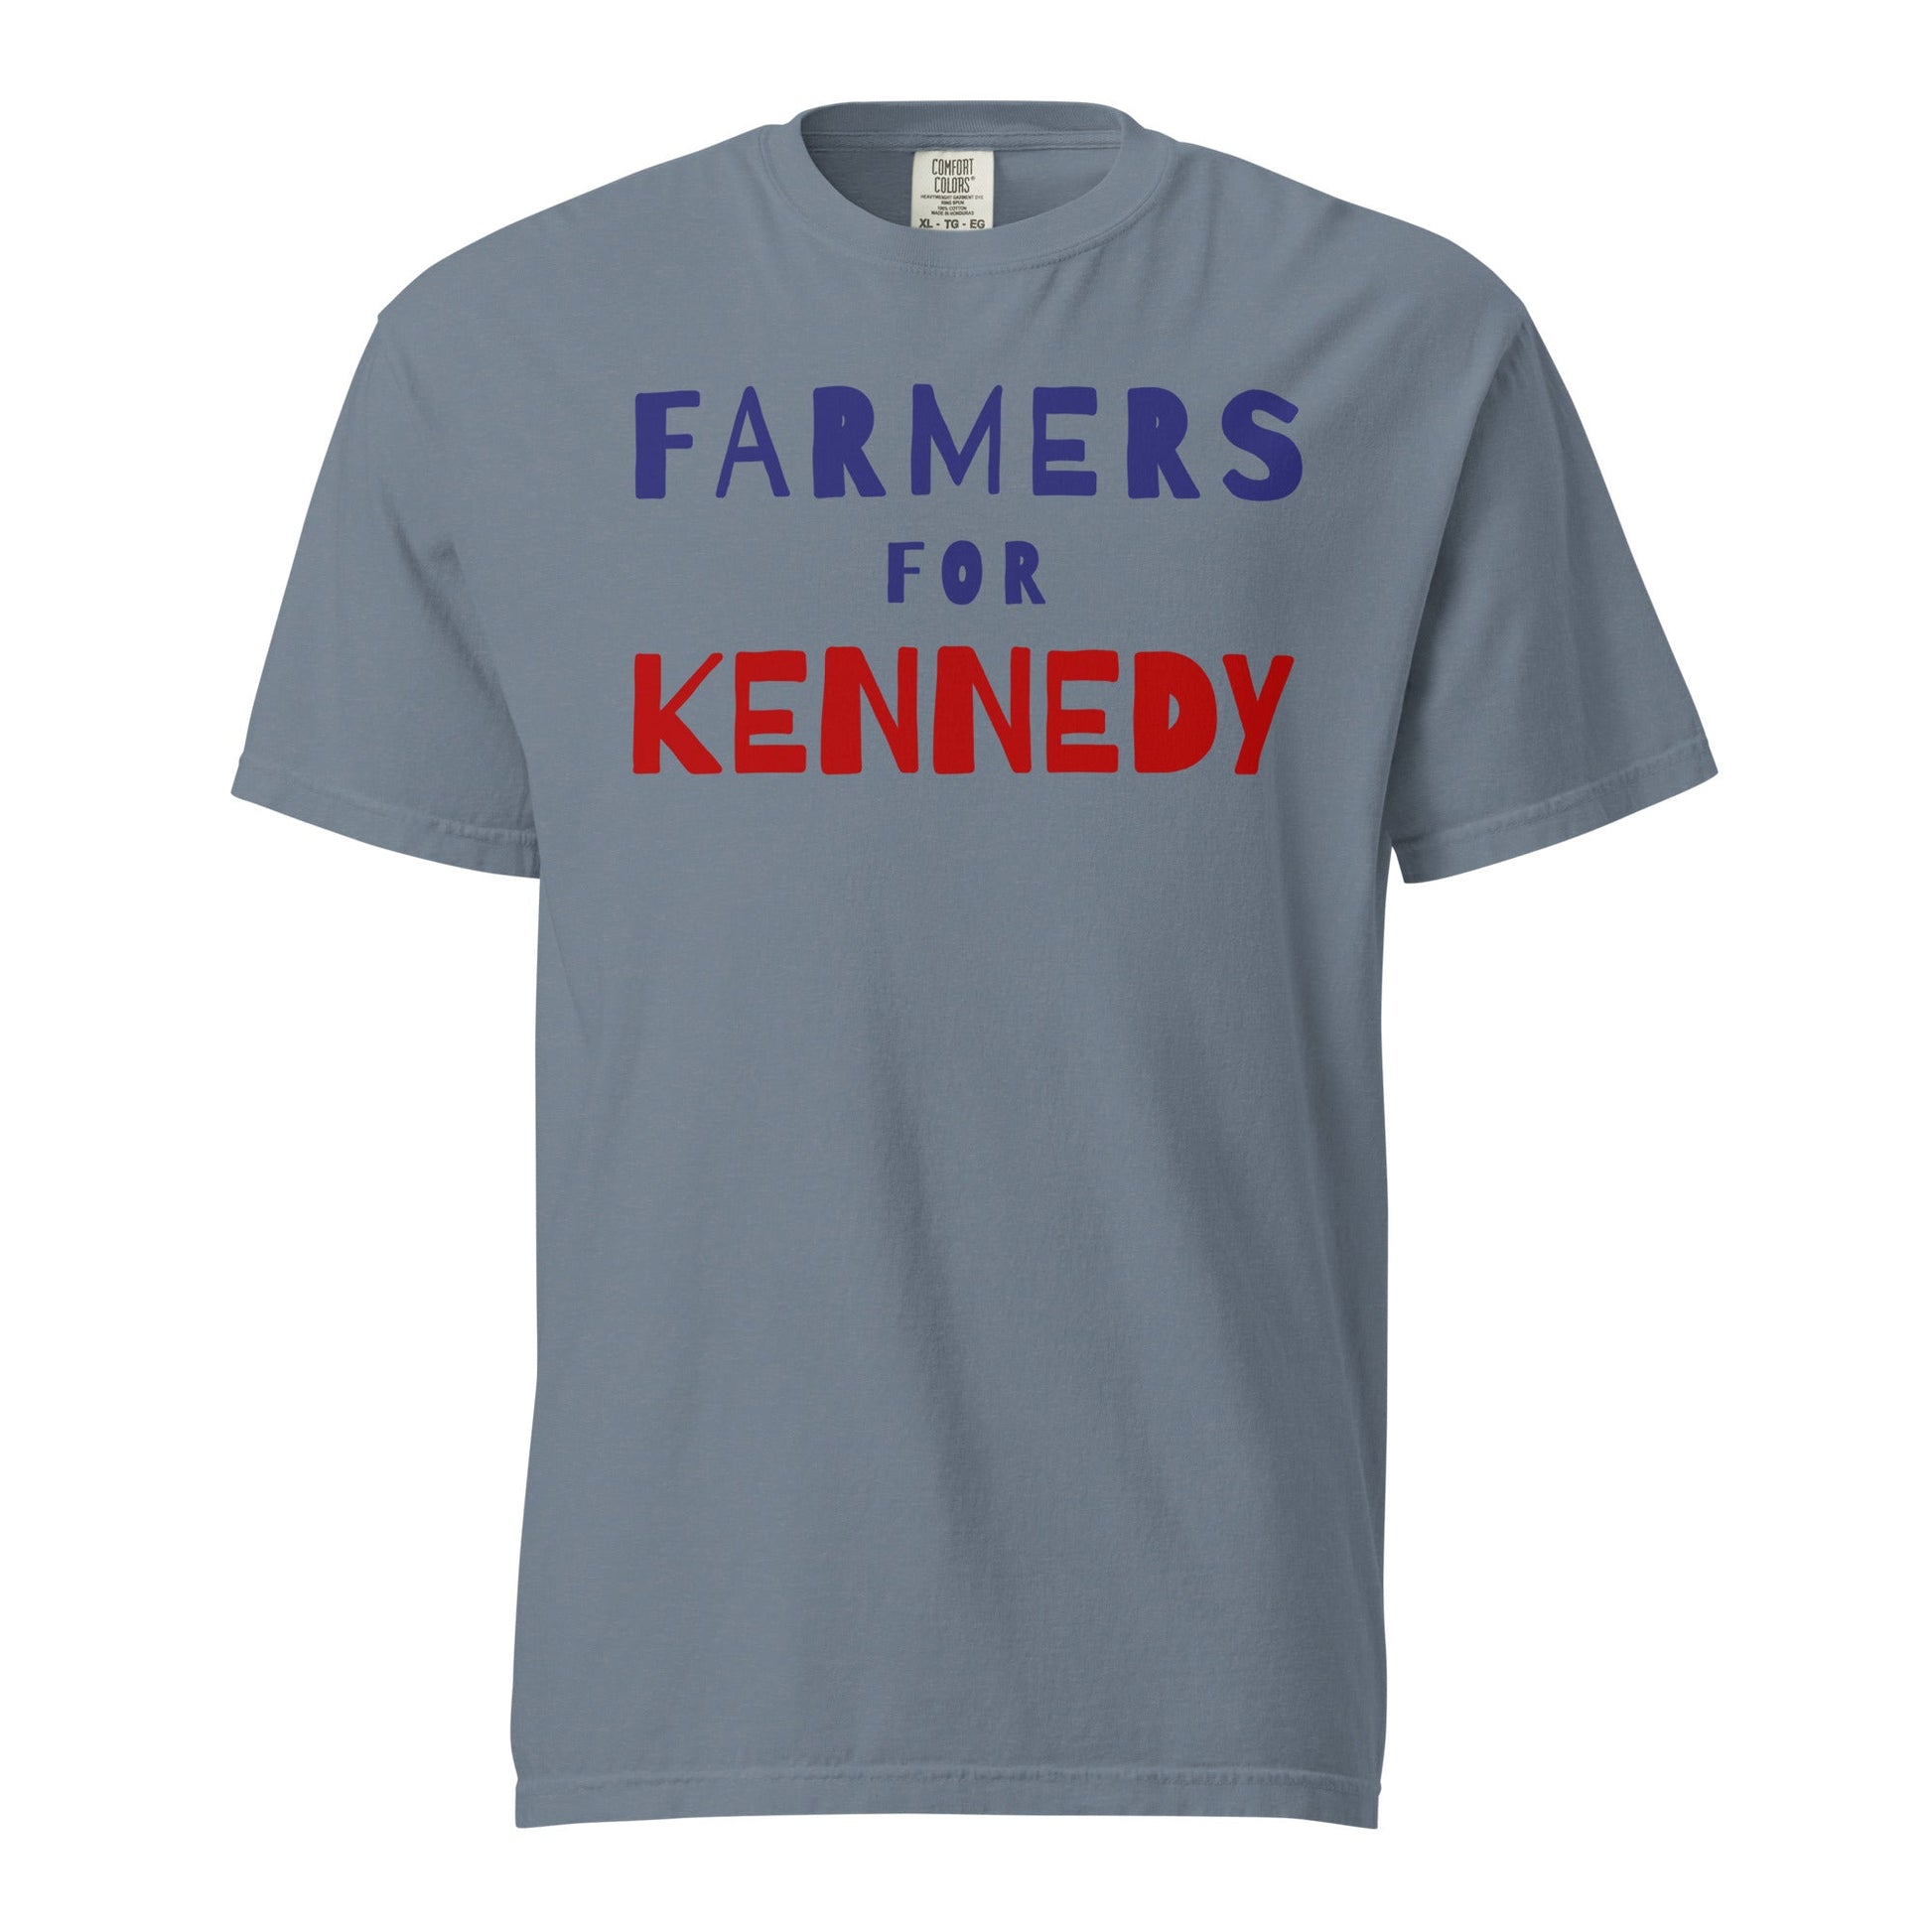 Farmers for Kennedy Unisex Heavyweight Tee - TEAM KENNEDY. All rights reserved